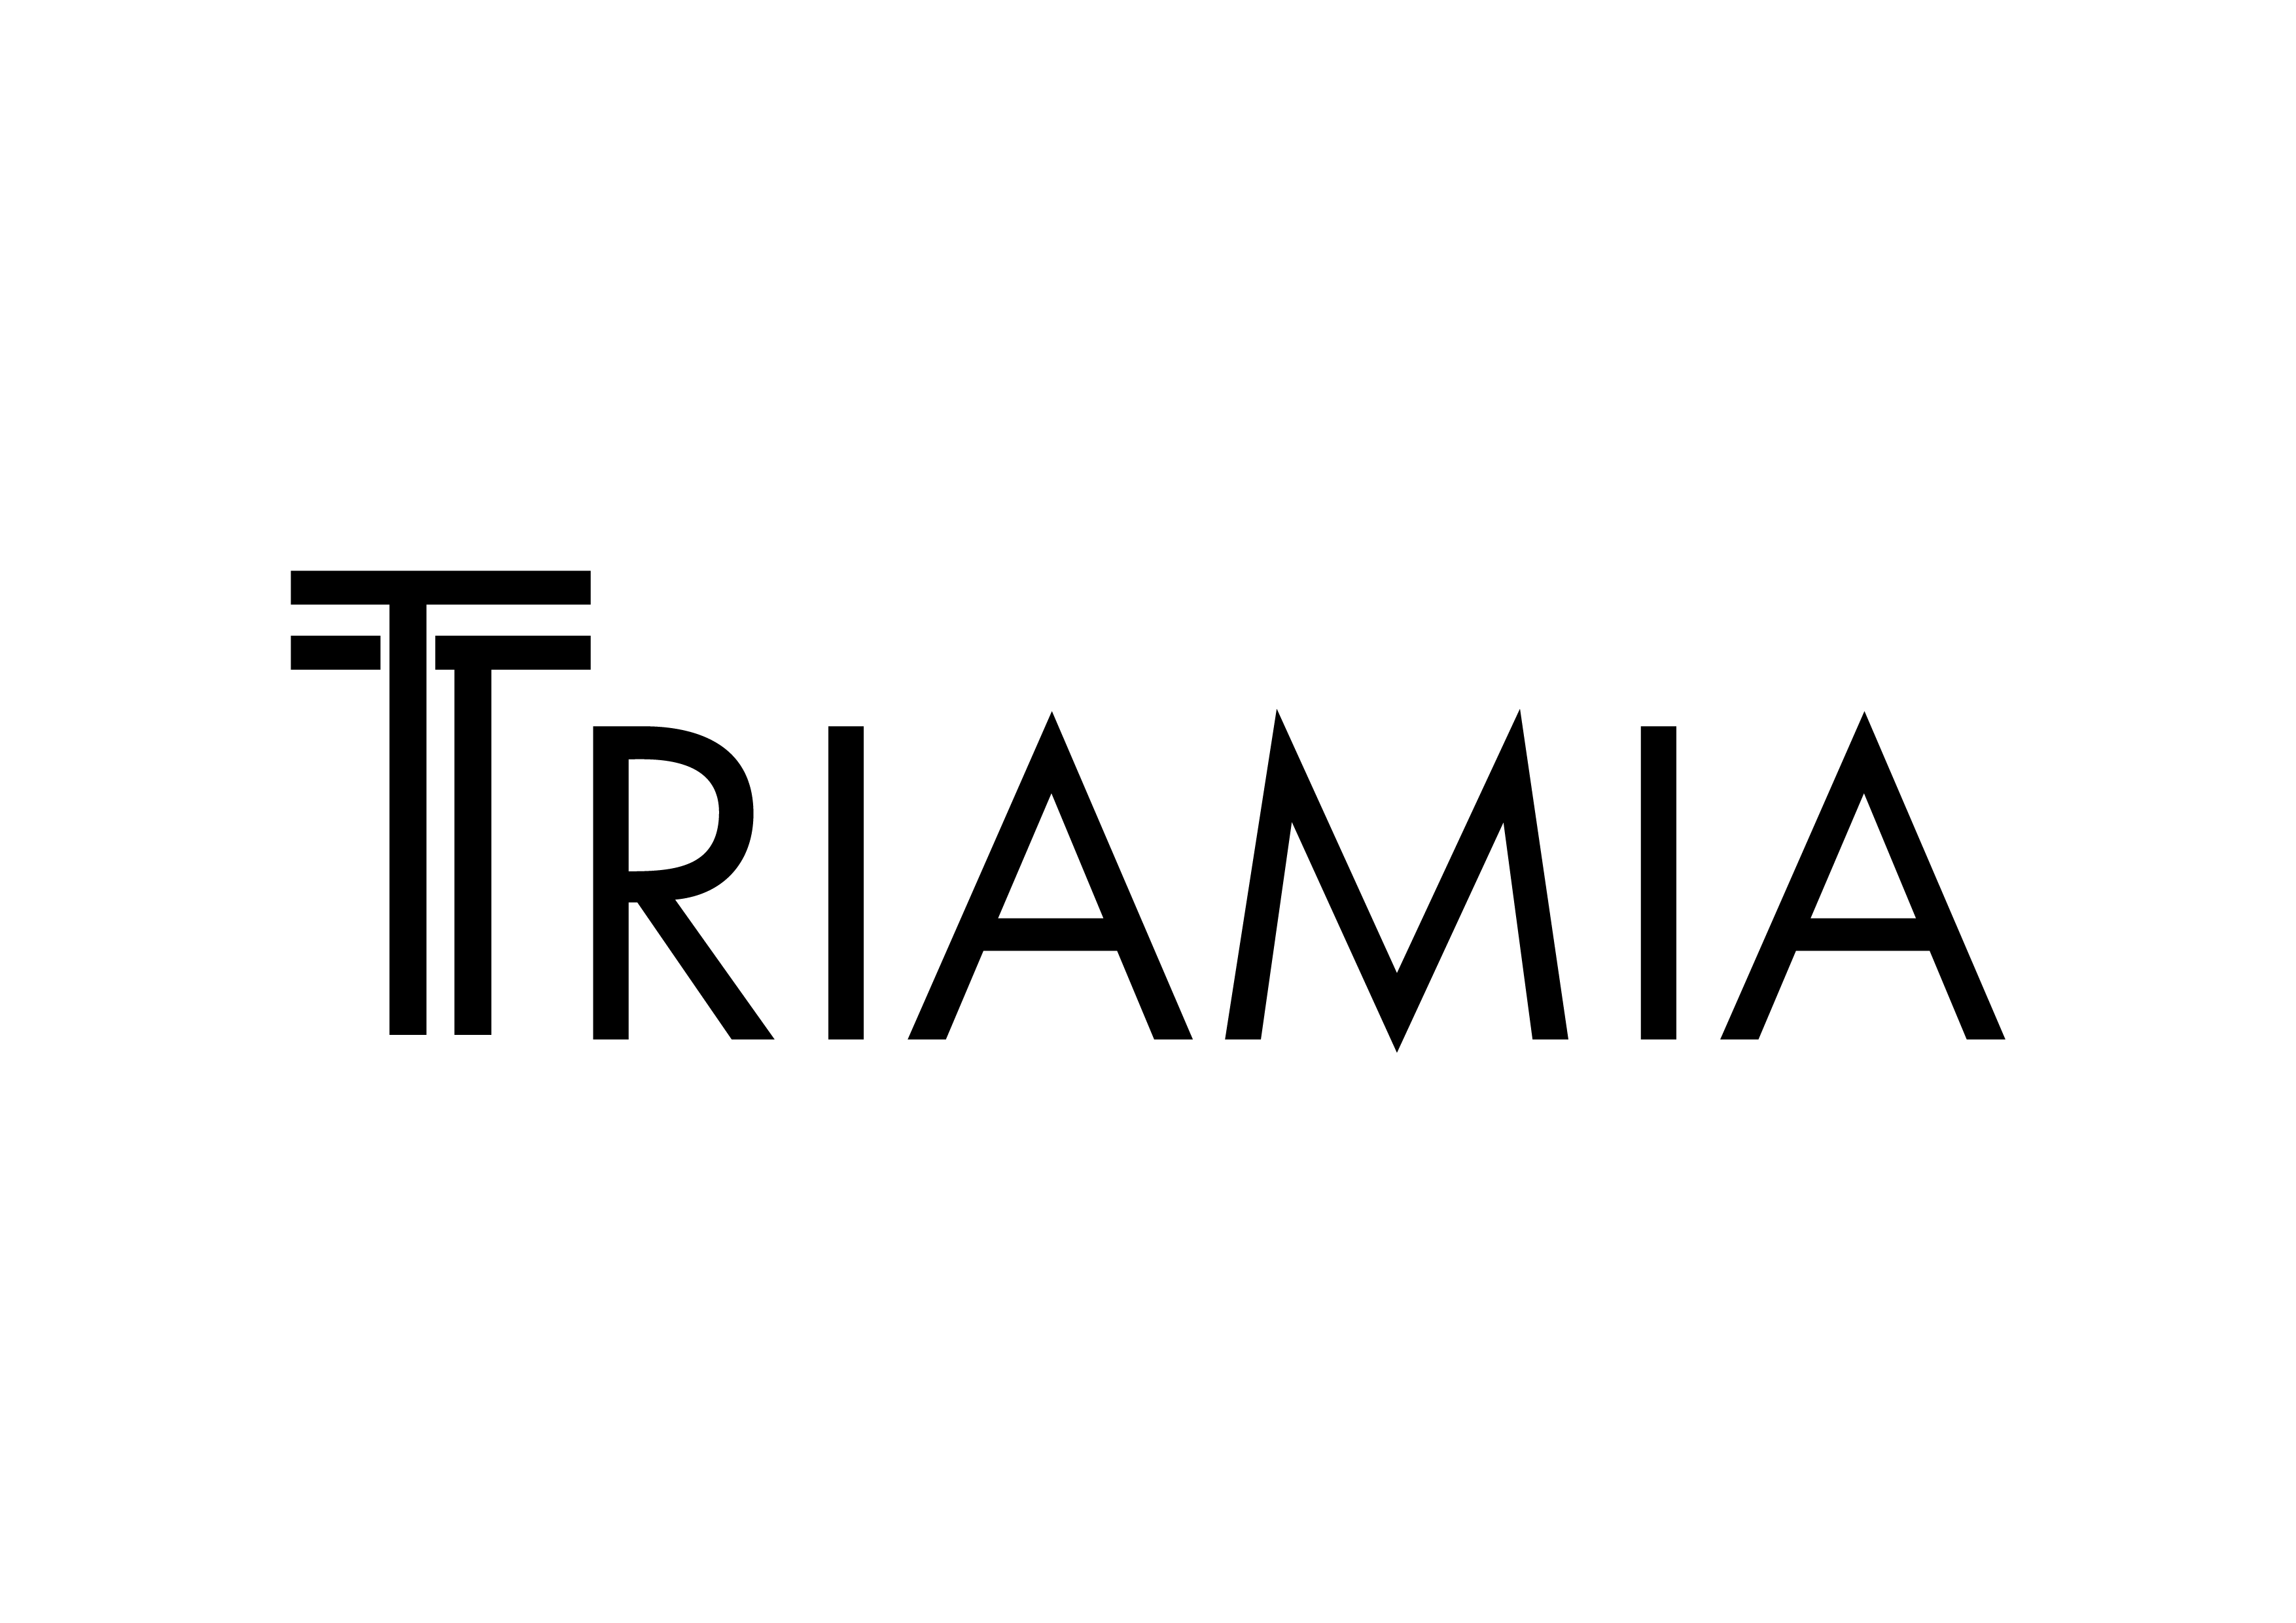 A black and white logo with the word trimaa.